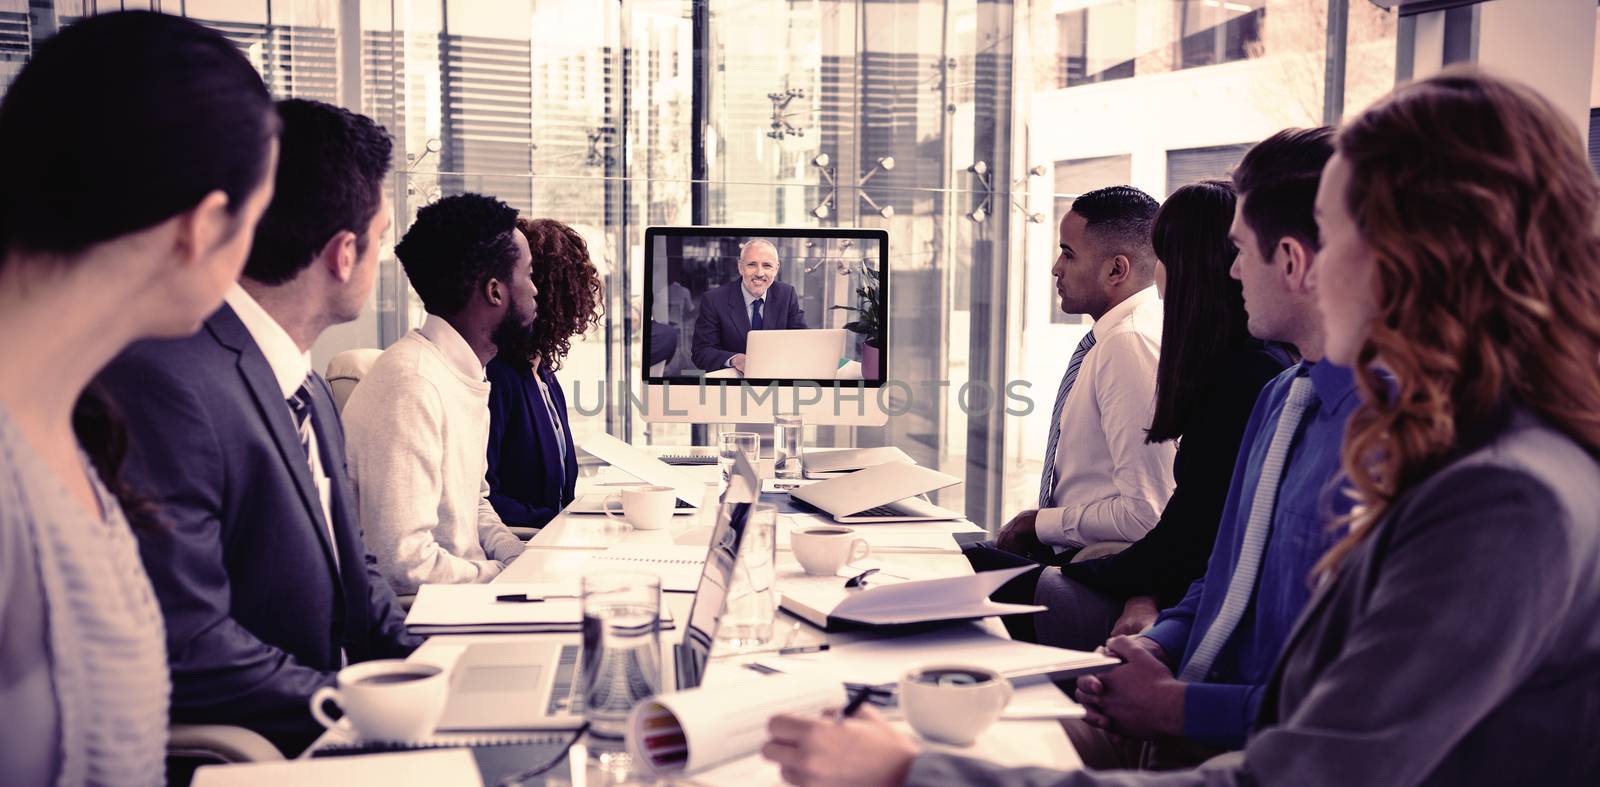 Focused business people looking at screen during video conference by Wavebreakmedia